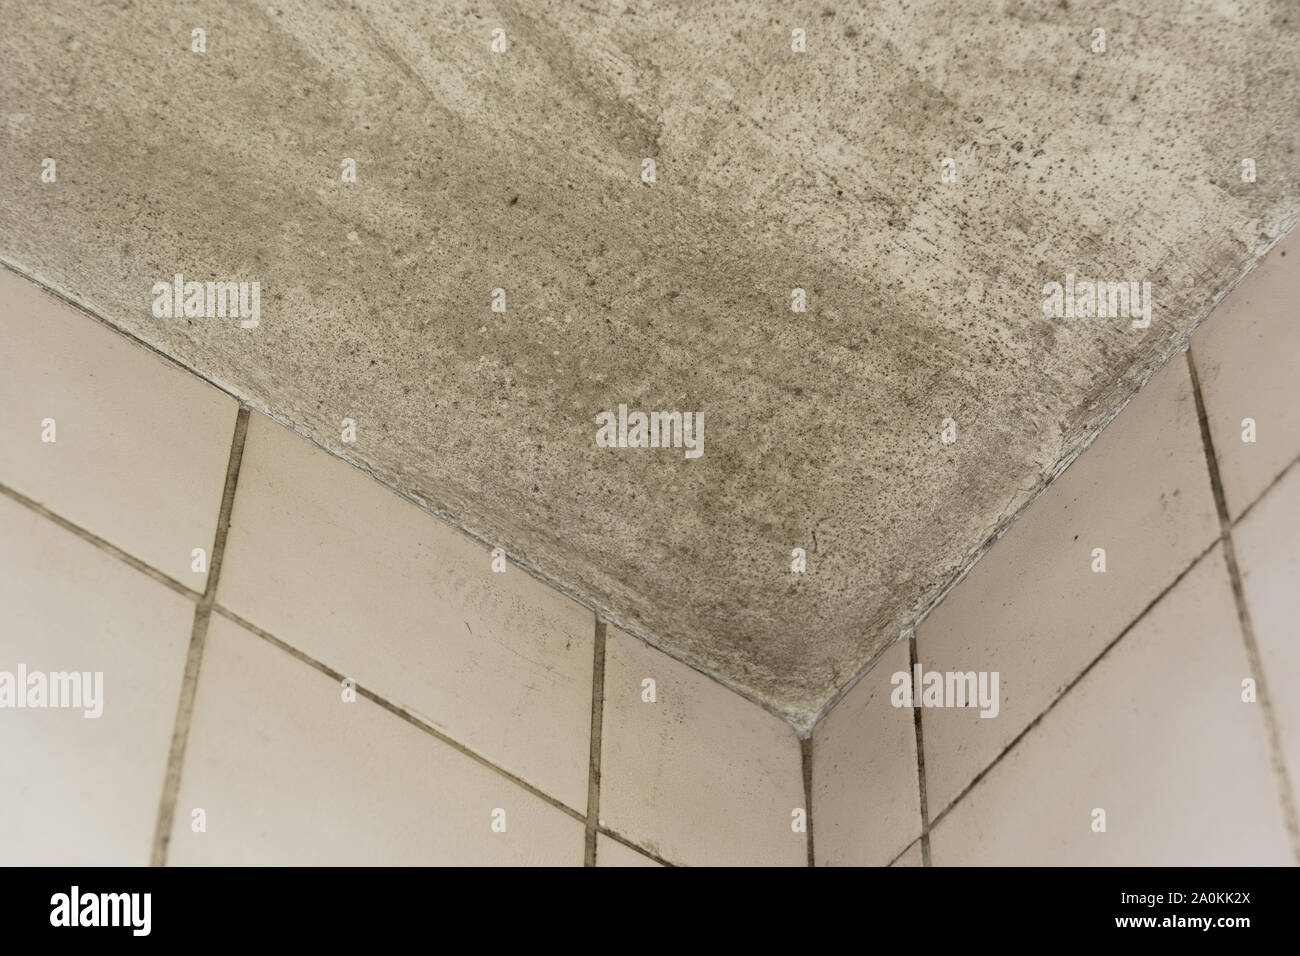 Spot of mold, mould, mildew or fungas on corner of ceiling above dirty tile pale pink wall. Stock Photo